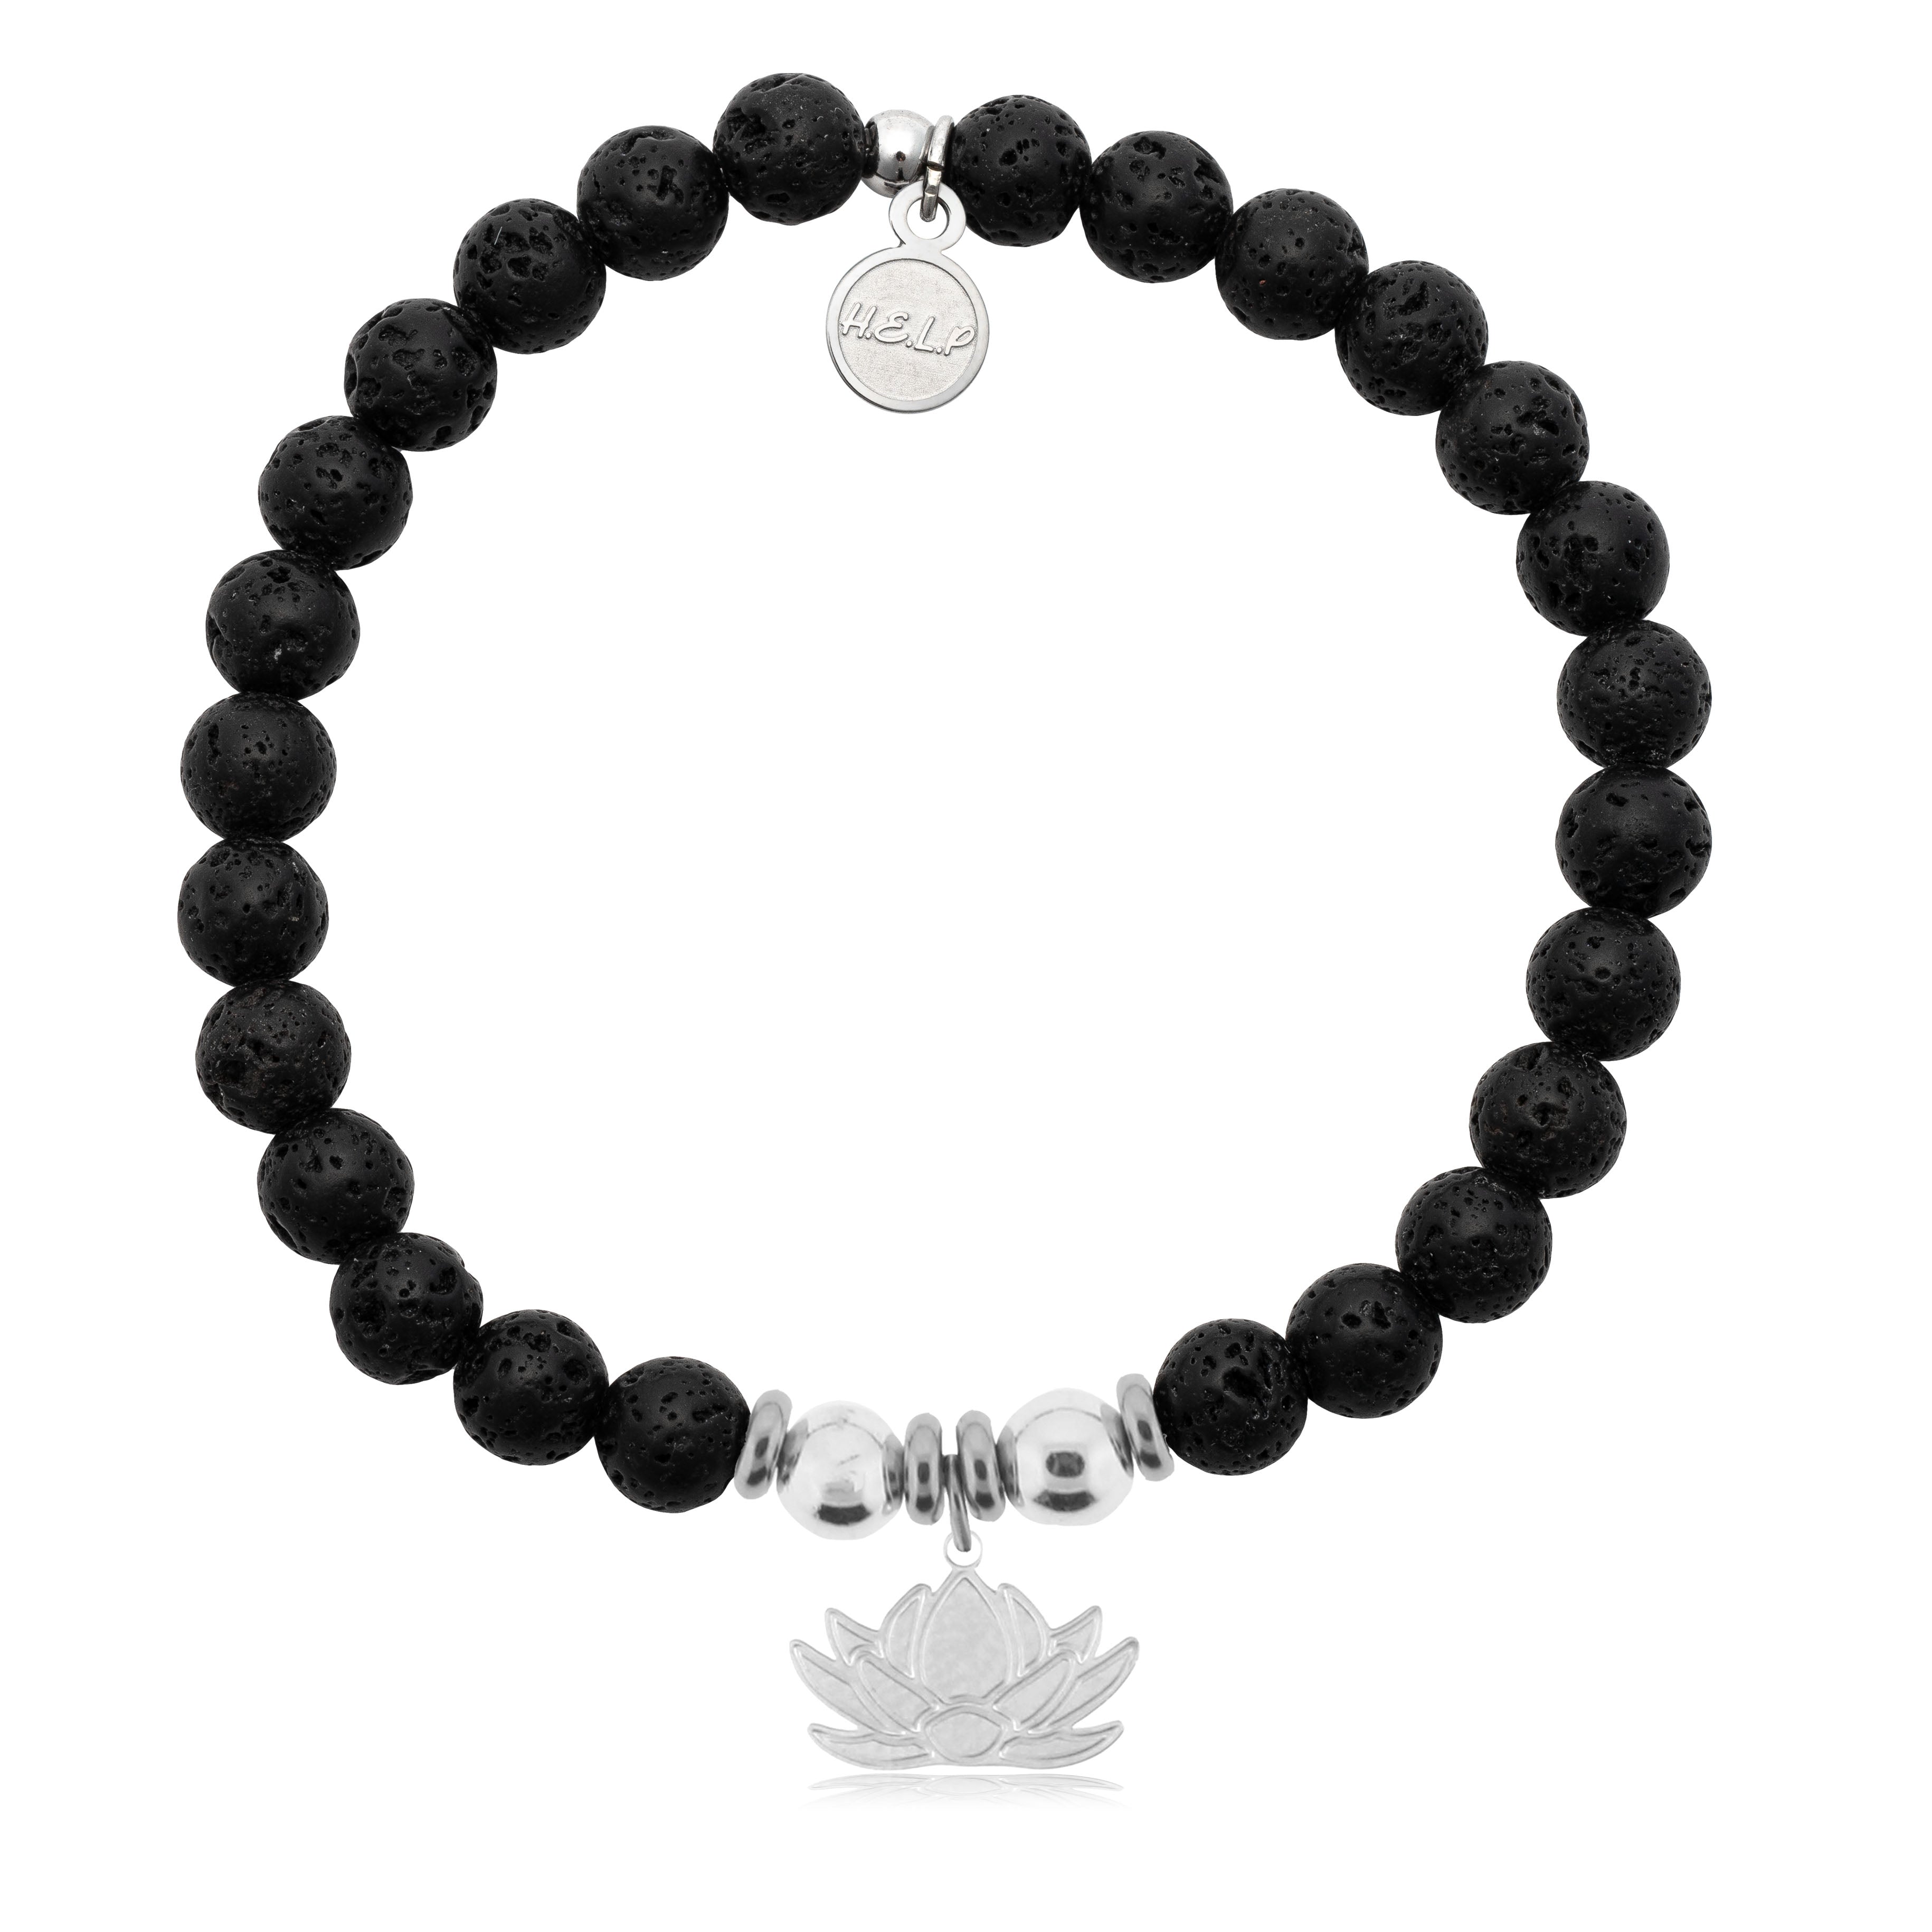 HELP by TJ Lotus Charm with Lava Rock Charity Bracelet